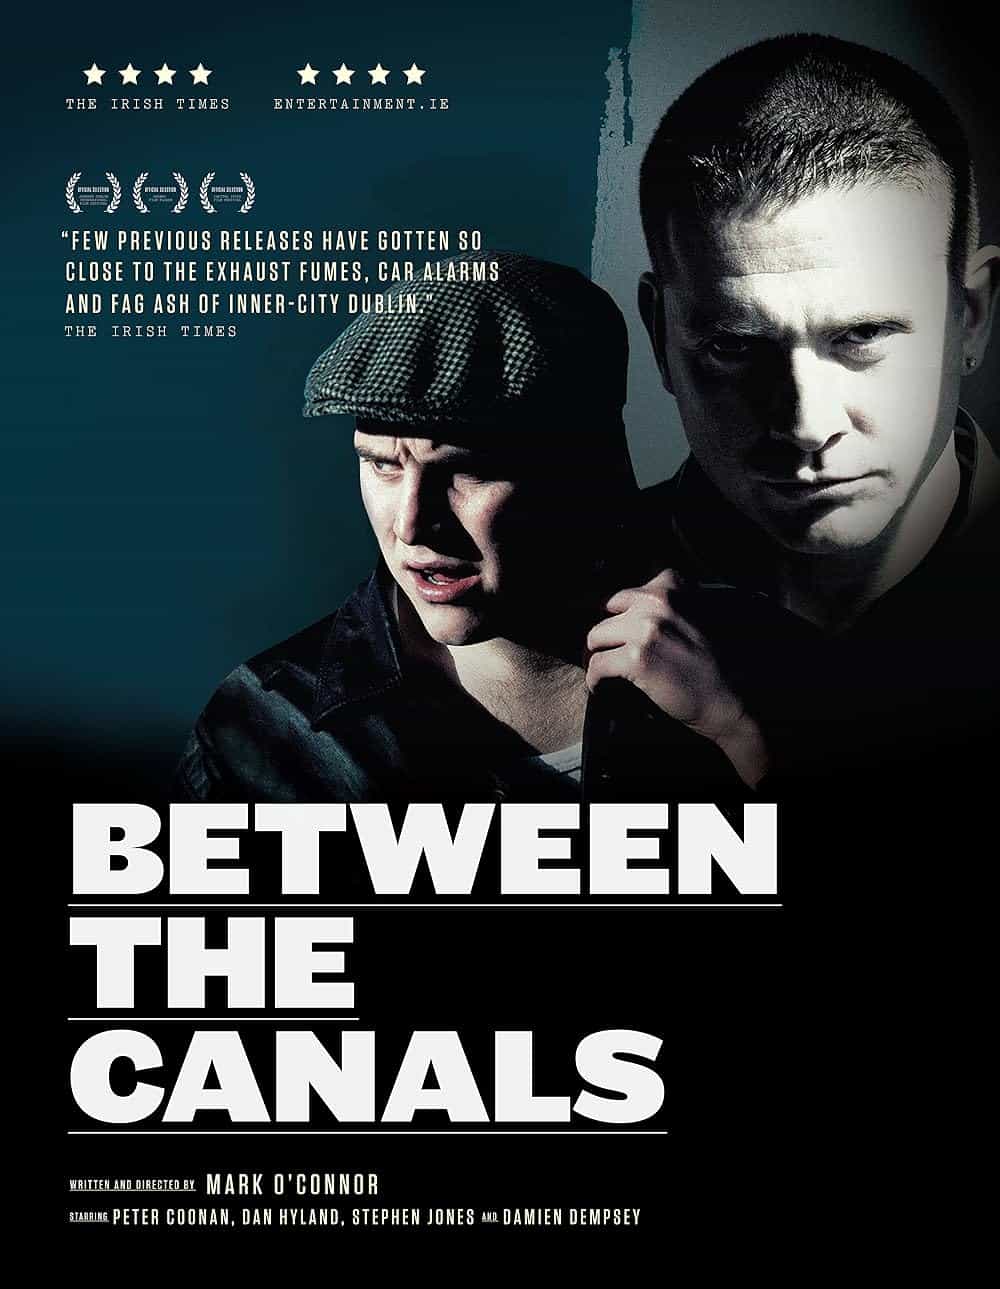 Between the Canals